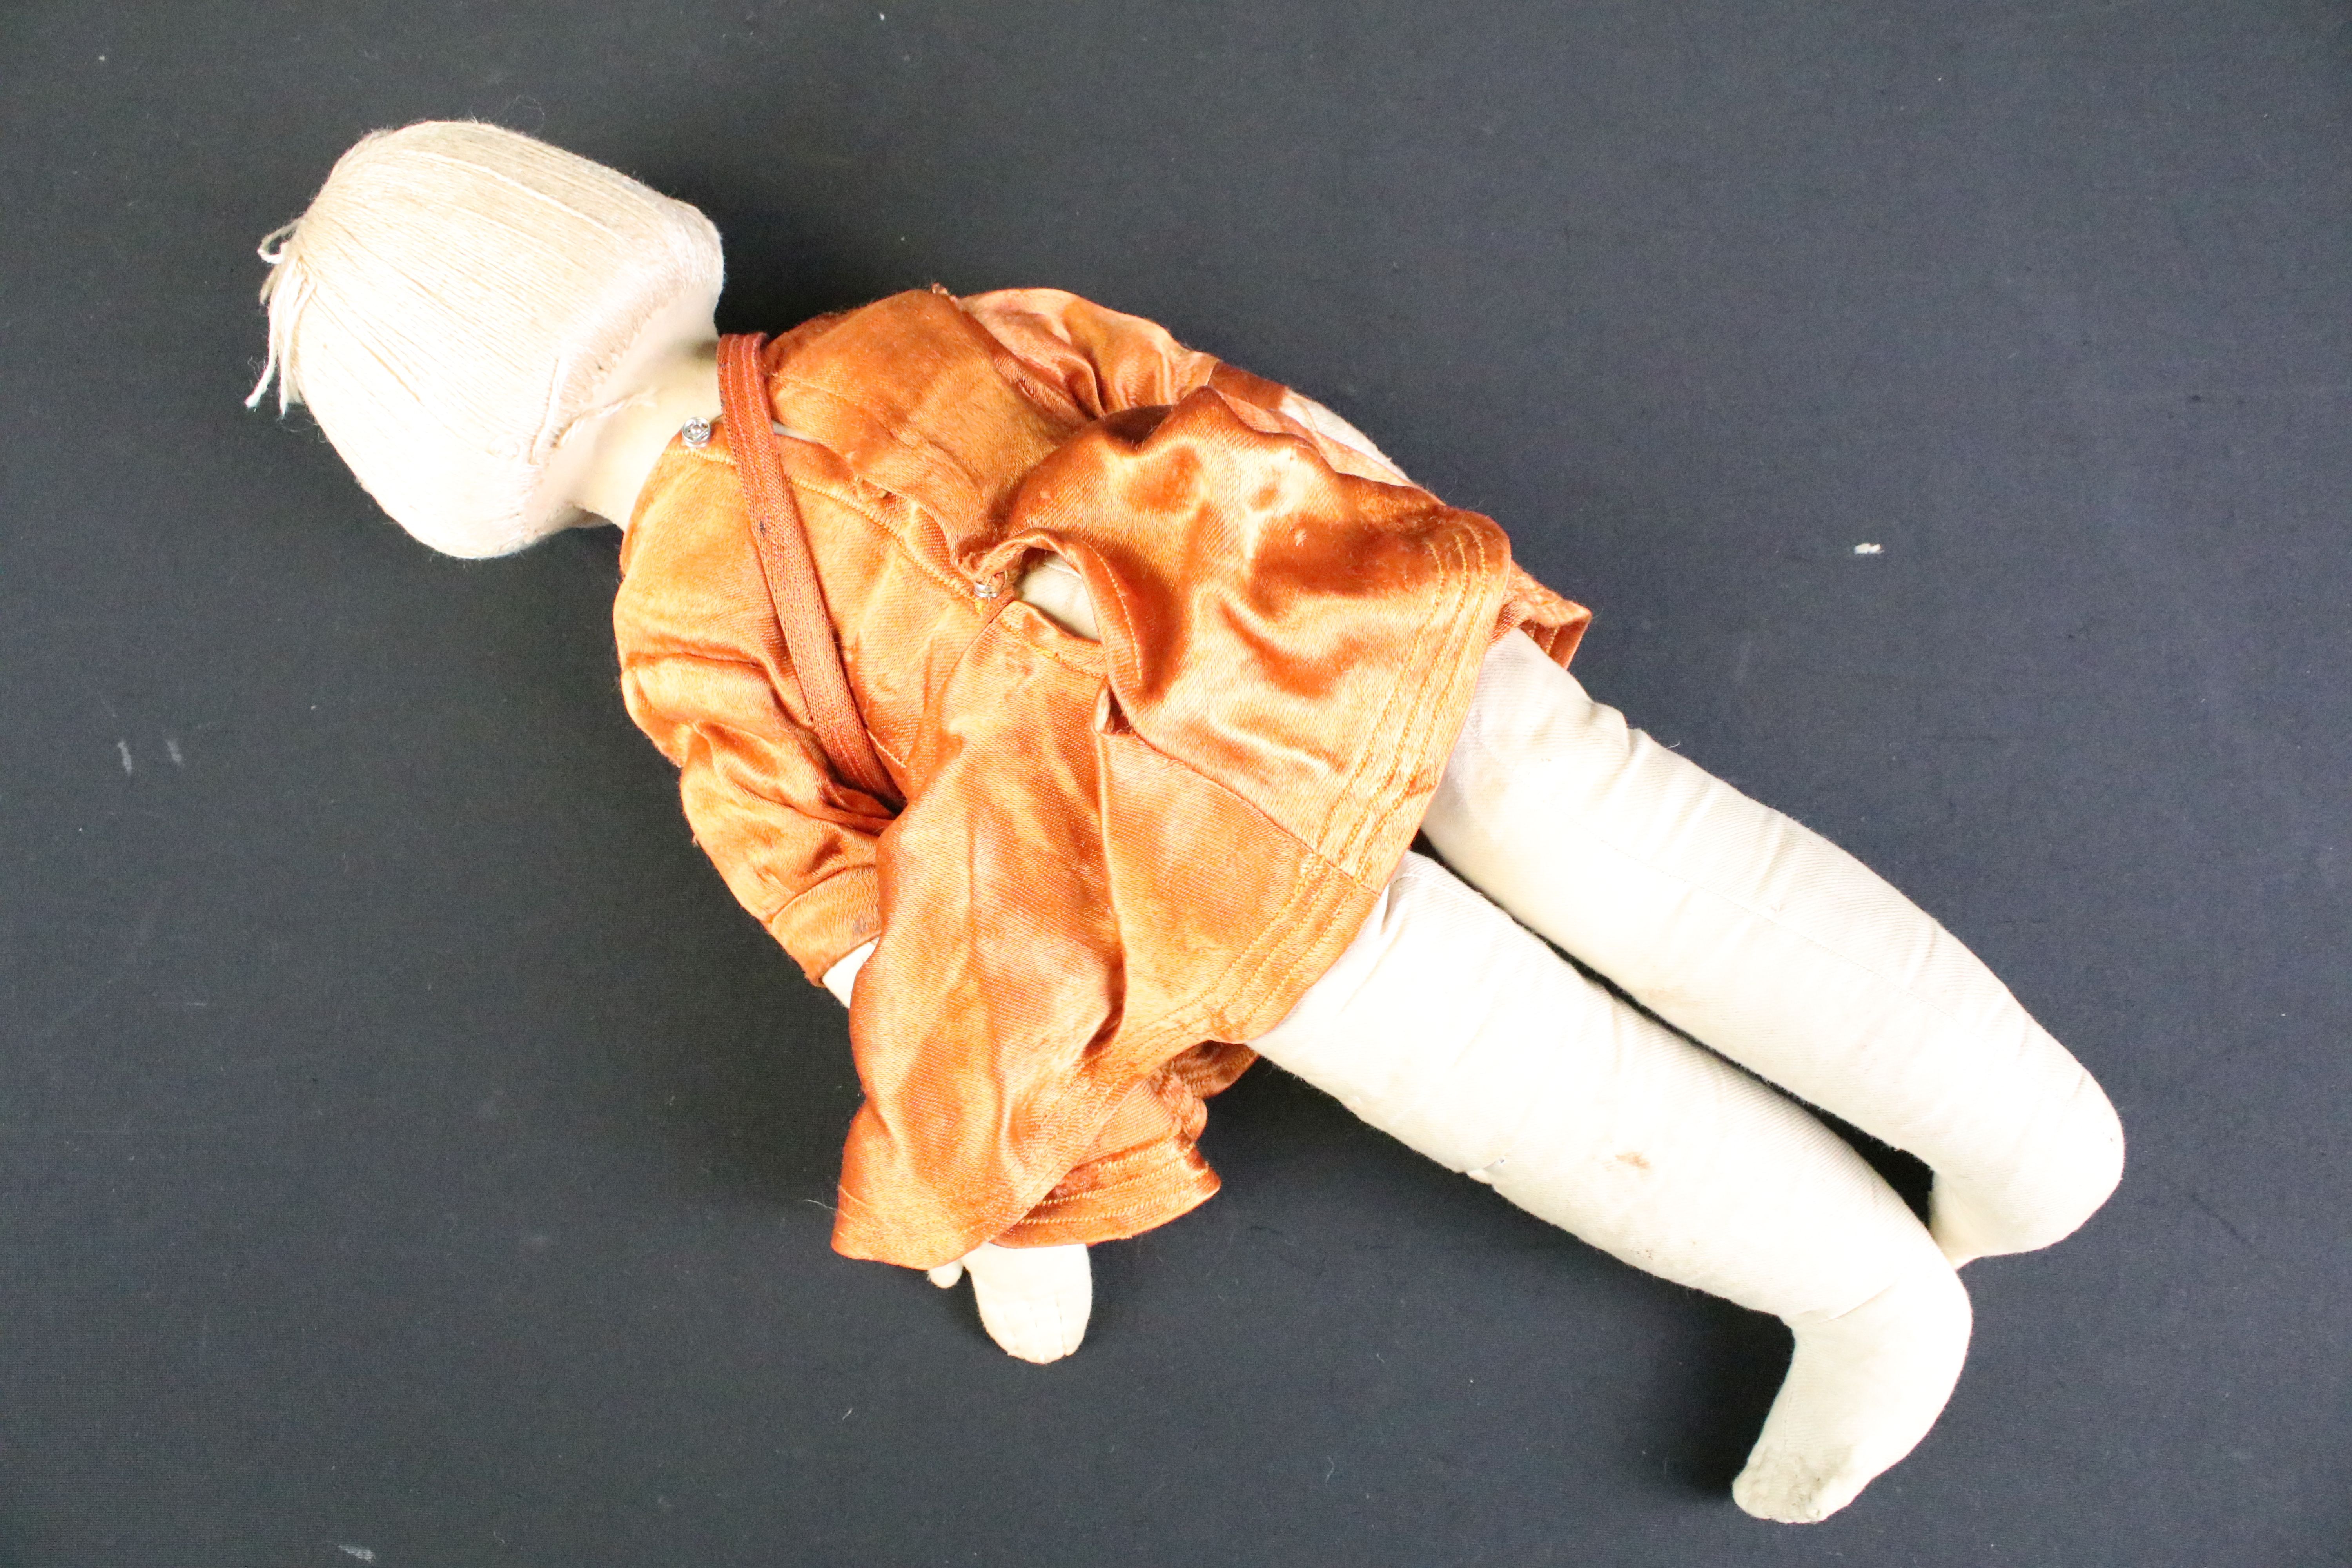 Pair of mid 20th C cloth covered dolls, clothed, with painted facial features and sewn hair. - Image 7 of 7